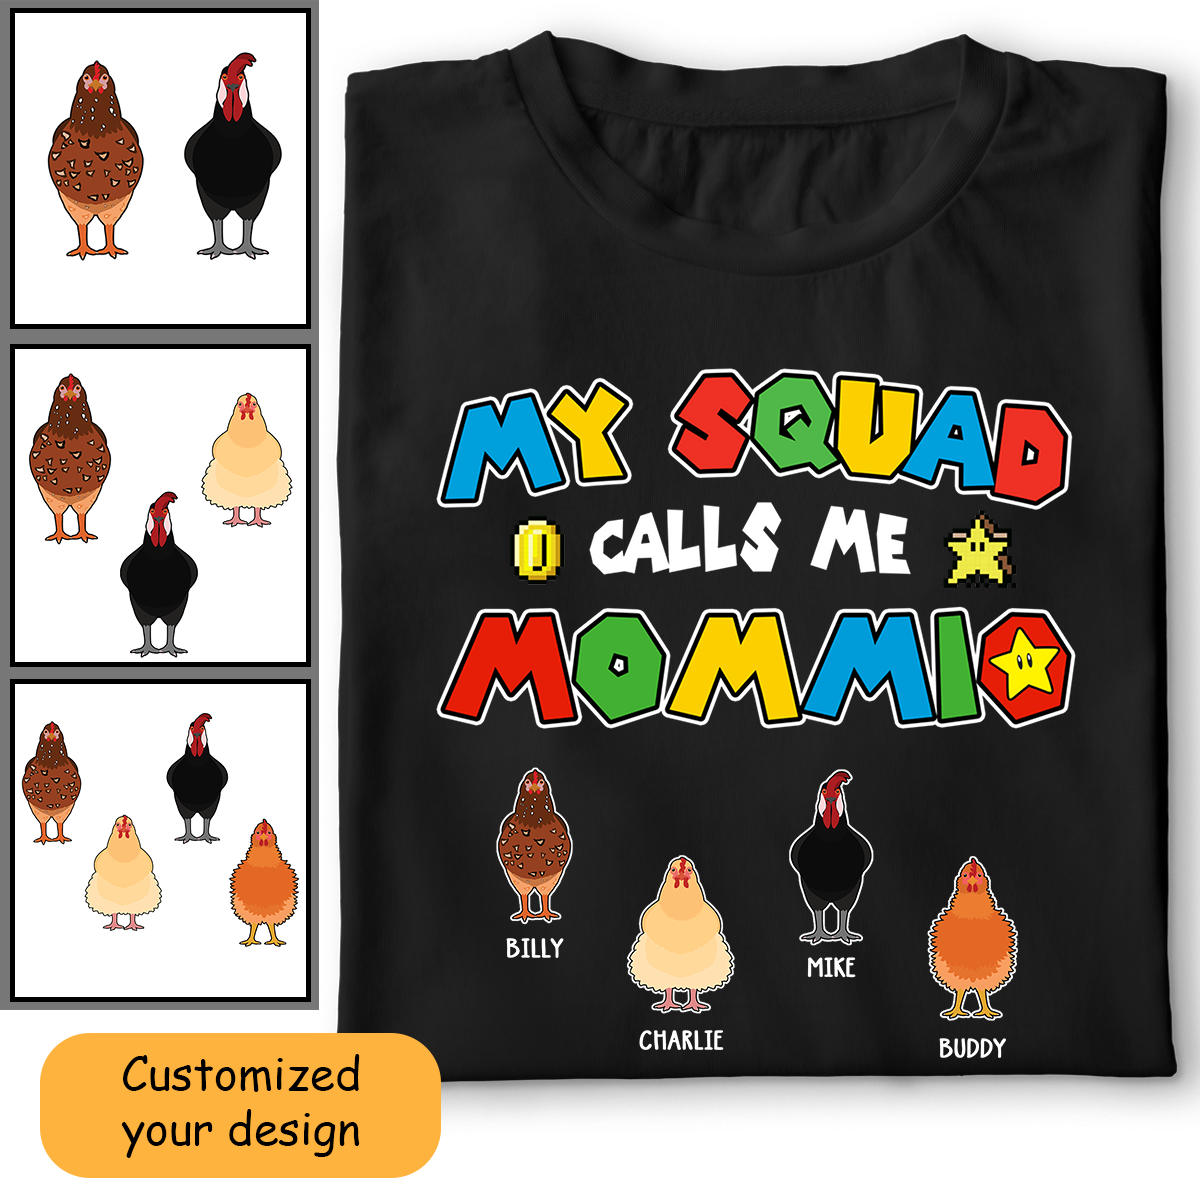 Customized Chicken Mom Shirt My Squad Calls Me Mommio For Mom, Mother, Grandma, Wife, Farmer, Mother's Day Gift, For Chicken Lovers